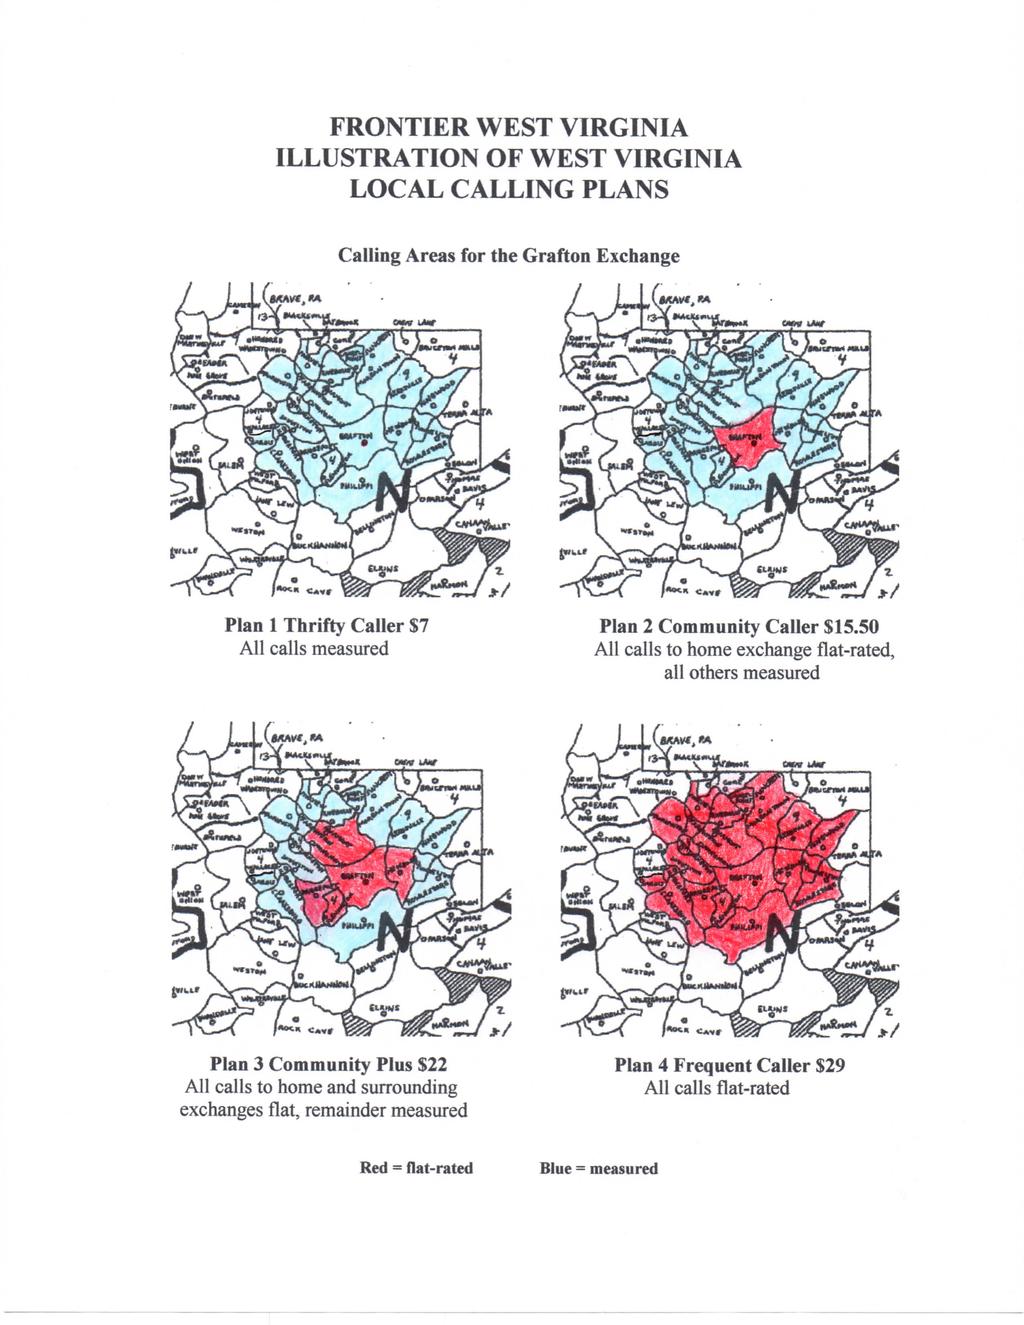 FRONTIER WEST VIRGINIA ILLUSTRATION OF WEST VIRGINIA LOCAL CALLING PLANS Calling Areas for the Grafton Exchange Plan 1 Thrifty Caller $7 All calls measured Plan 2 Community Caller $15.